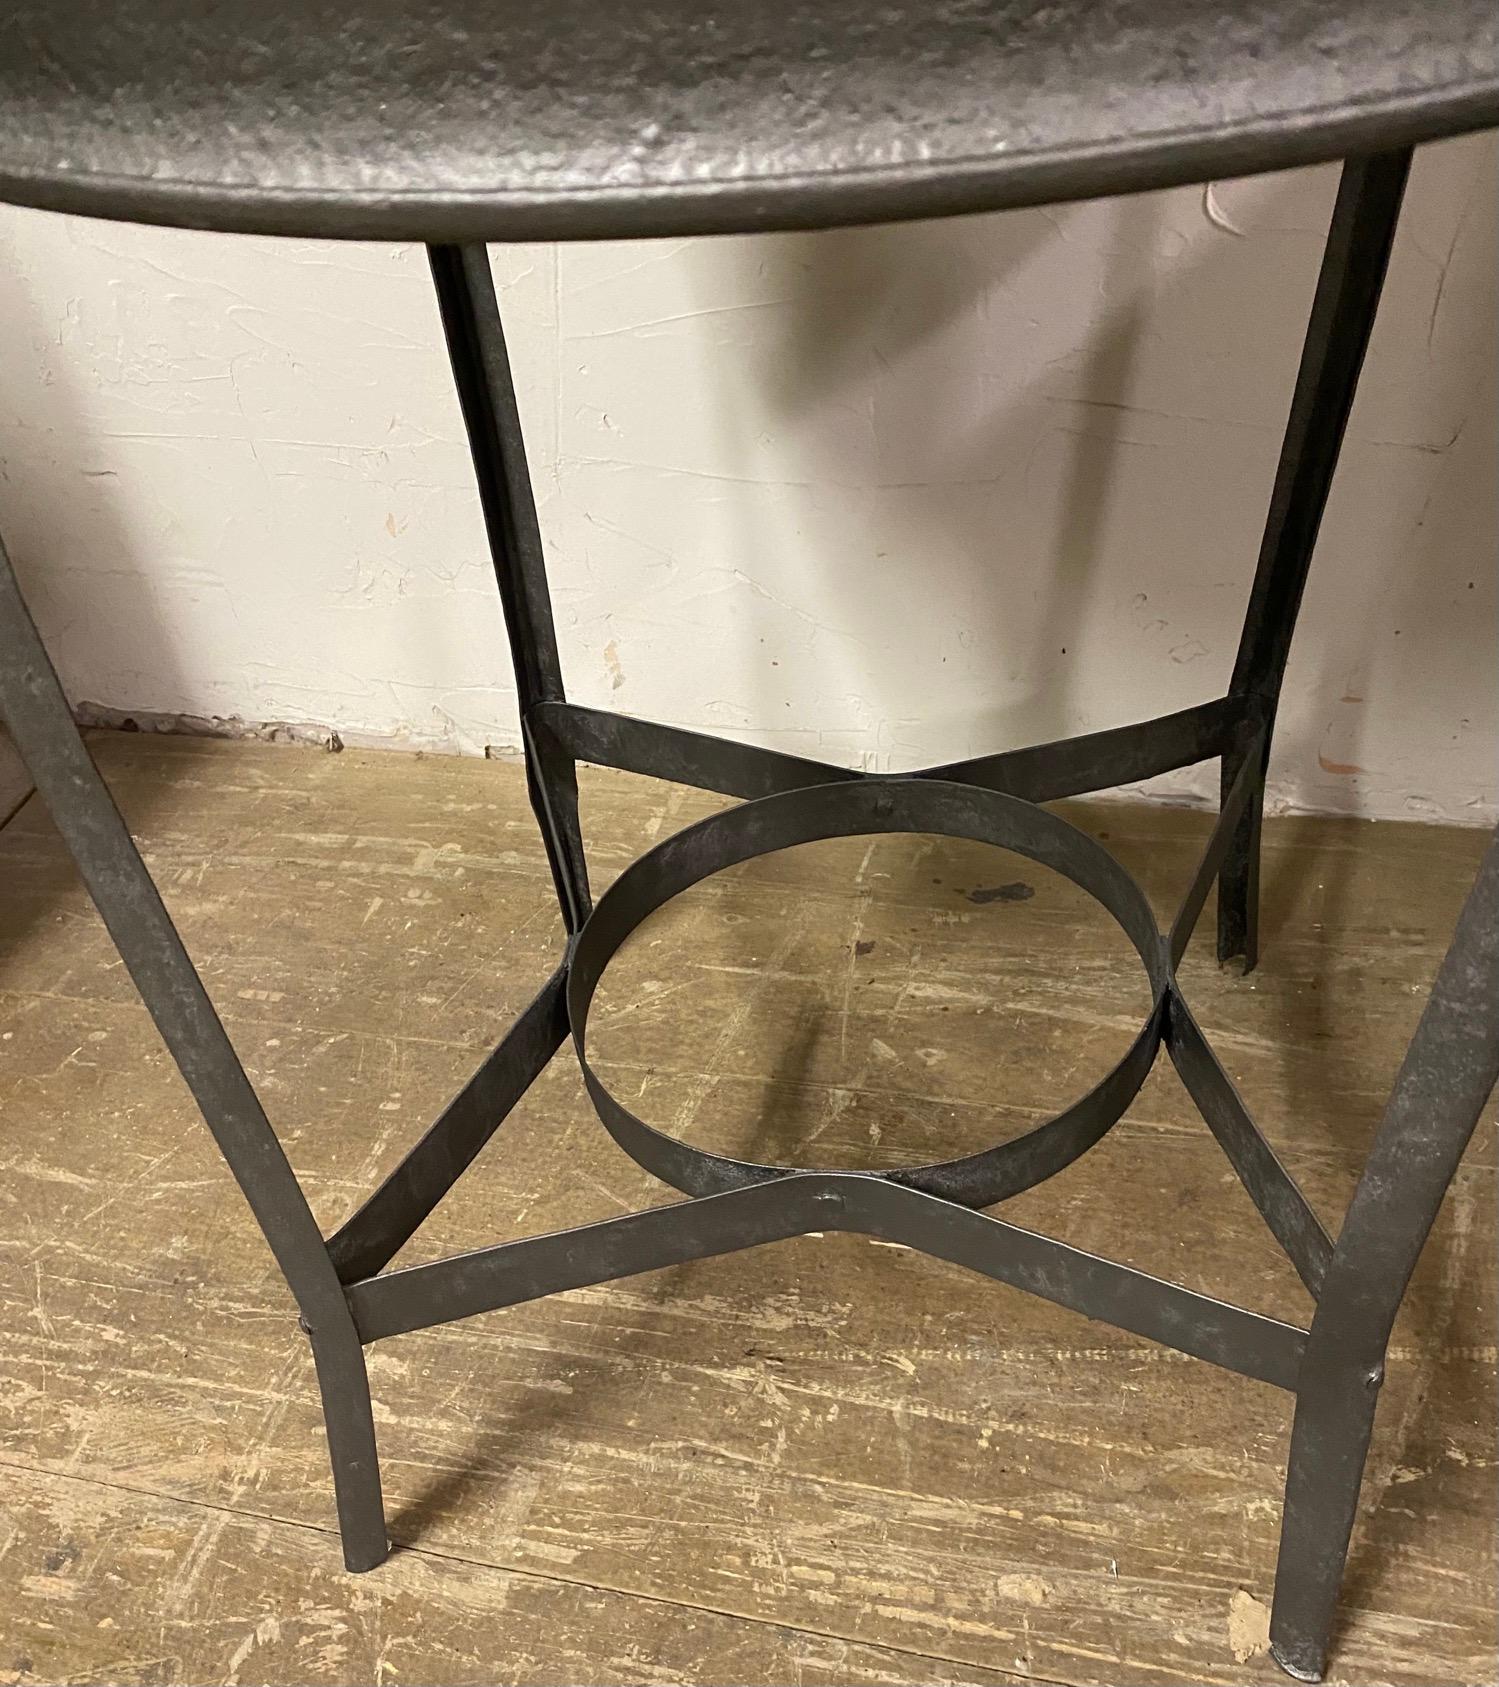 Round French patinated iron patio bistro indoor or outdoor garden table.
Use this table as an end table, side table, occasional table or center table.
Measures: 19 x 19 base.